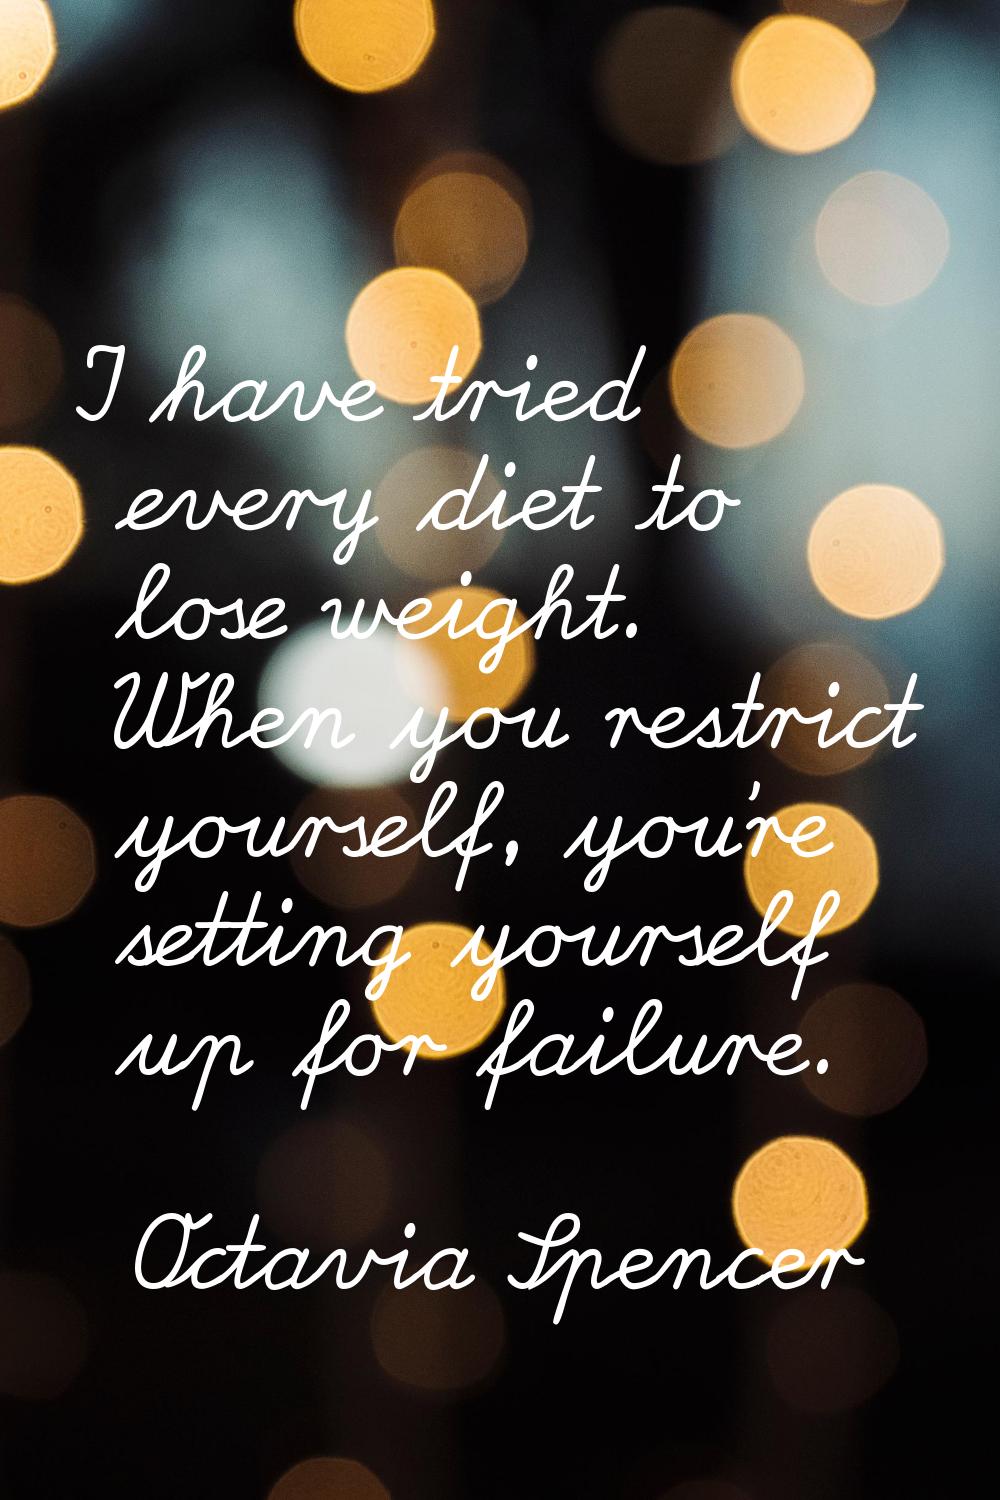 I have tried every diet to lose weight. When you restrict yourself, you're setting yourself up for 